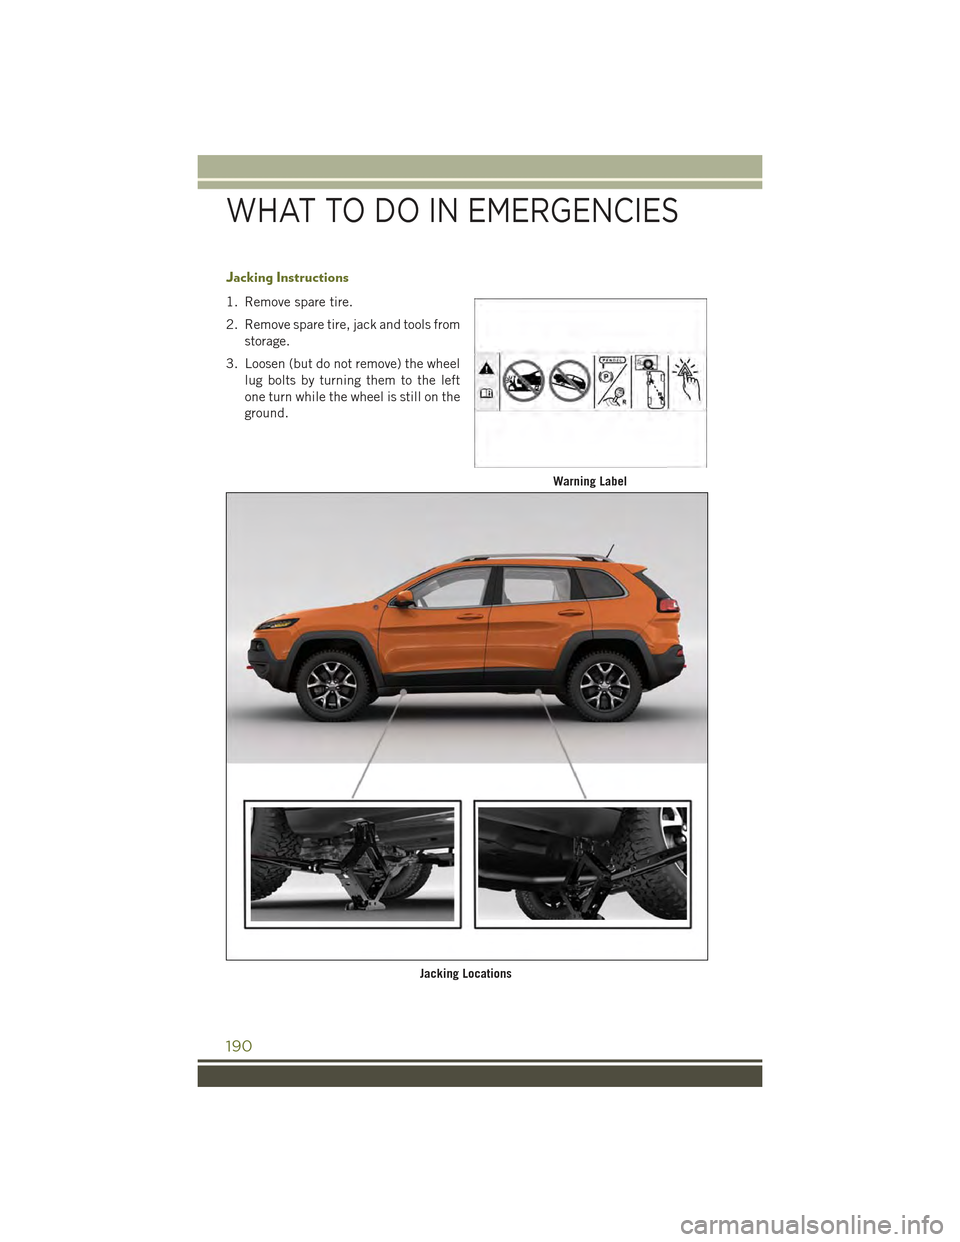 JEEP CHEROKEE 2015 KL / 5.G User Guide Jacking Instructions
1. Remove spare tire.
2. Remove spare tire, jack and tools from
storage.
3. Loosen (but do not remove) the wheel
lug bolts by turning them to the left
one turn while the wheel is 